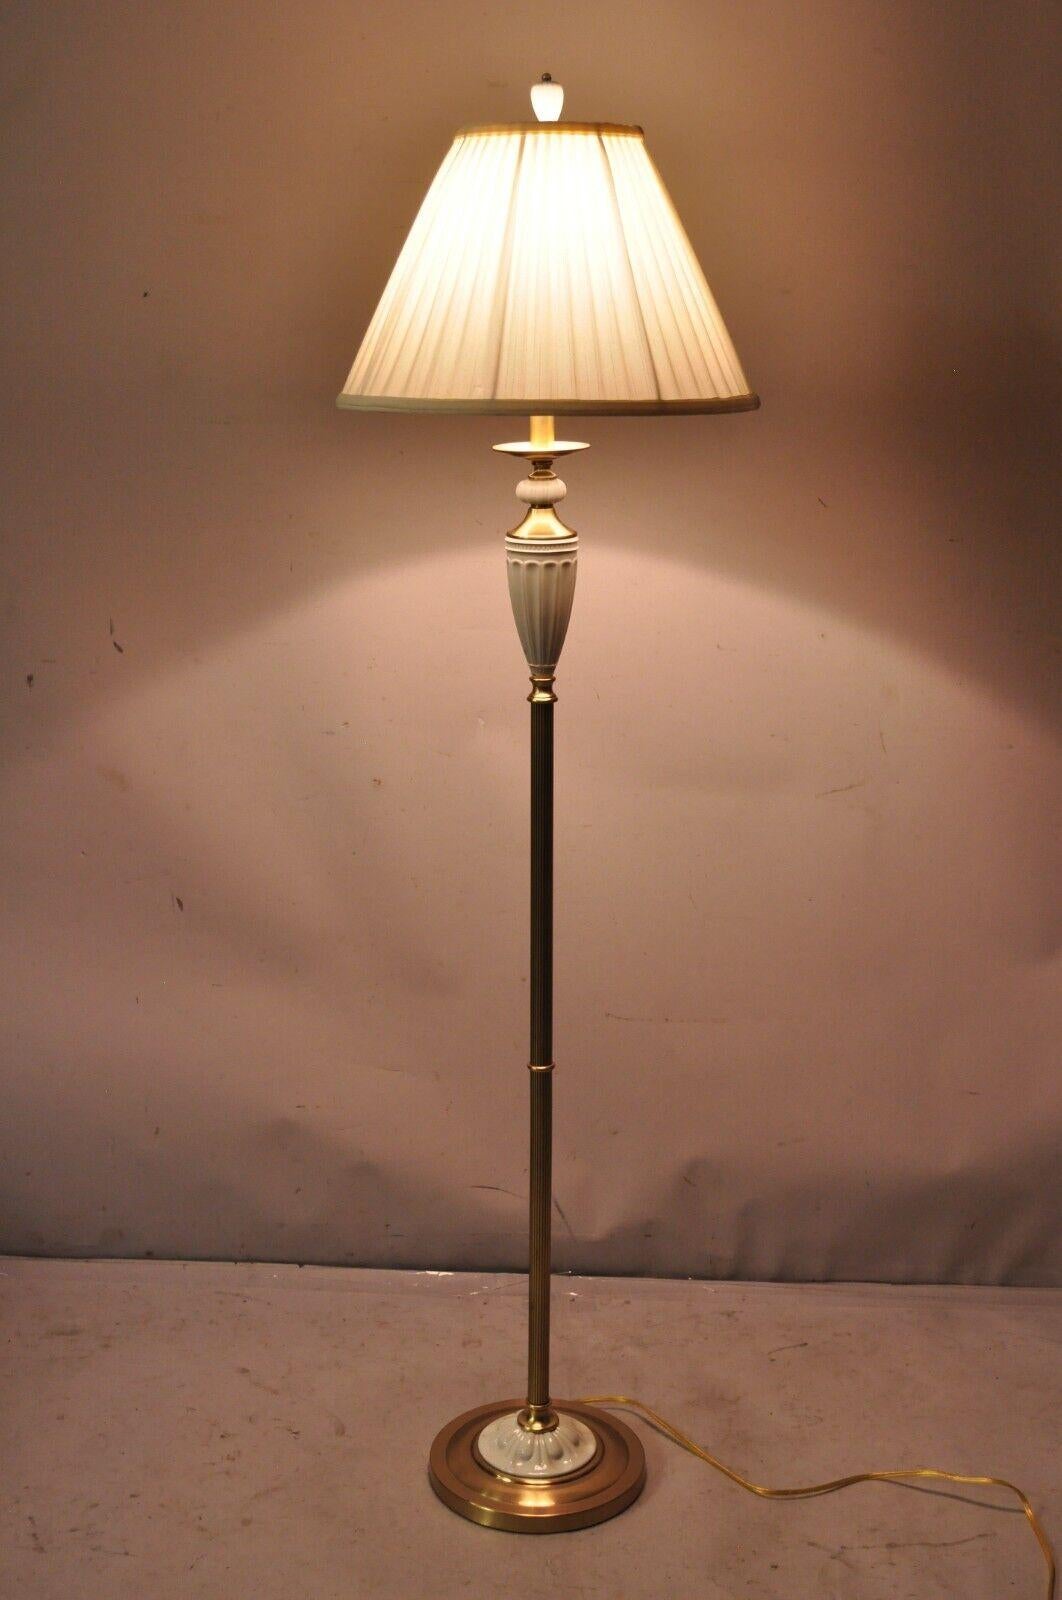 Lenox Quoizel White Porcelain Brass Candlestick Pole Floor Lamp with Shade 2